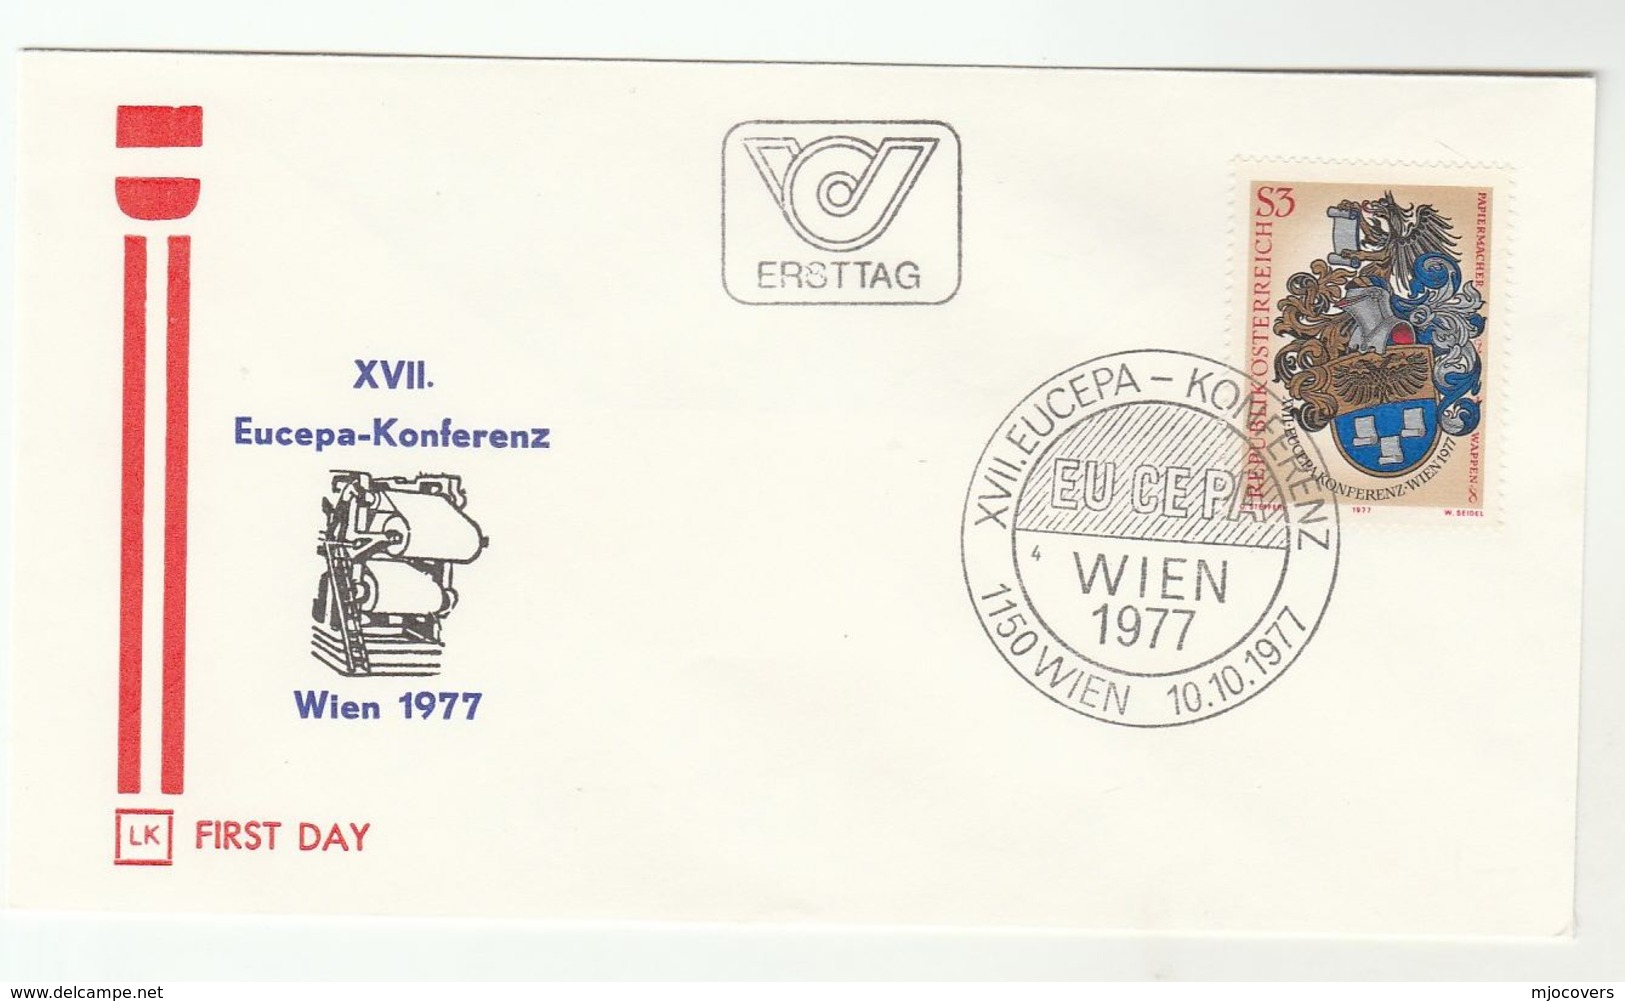 1977 Austria FDC HERALDIC EUCEPA  PAPER MAKING Industry CONFERENCE  Stamps SPECIAL Pmk  Cover Illus Paper Making Machine - Covers